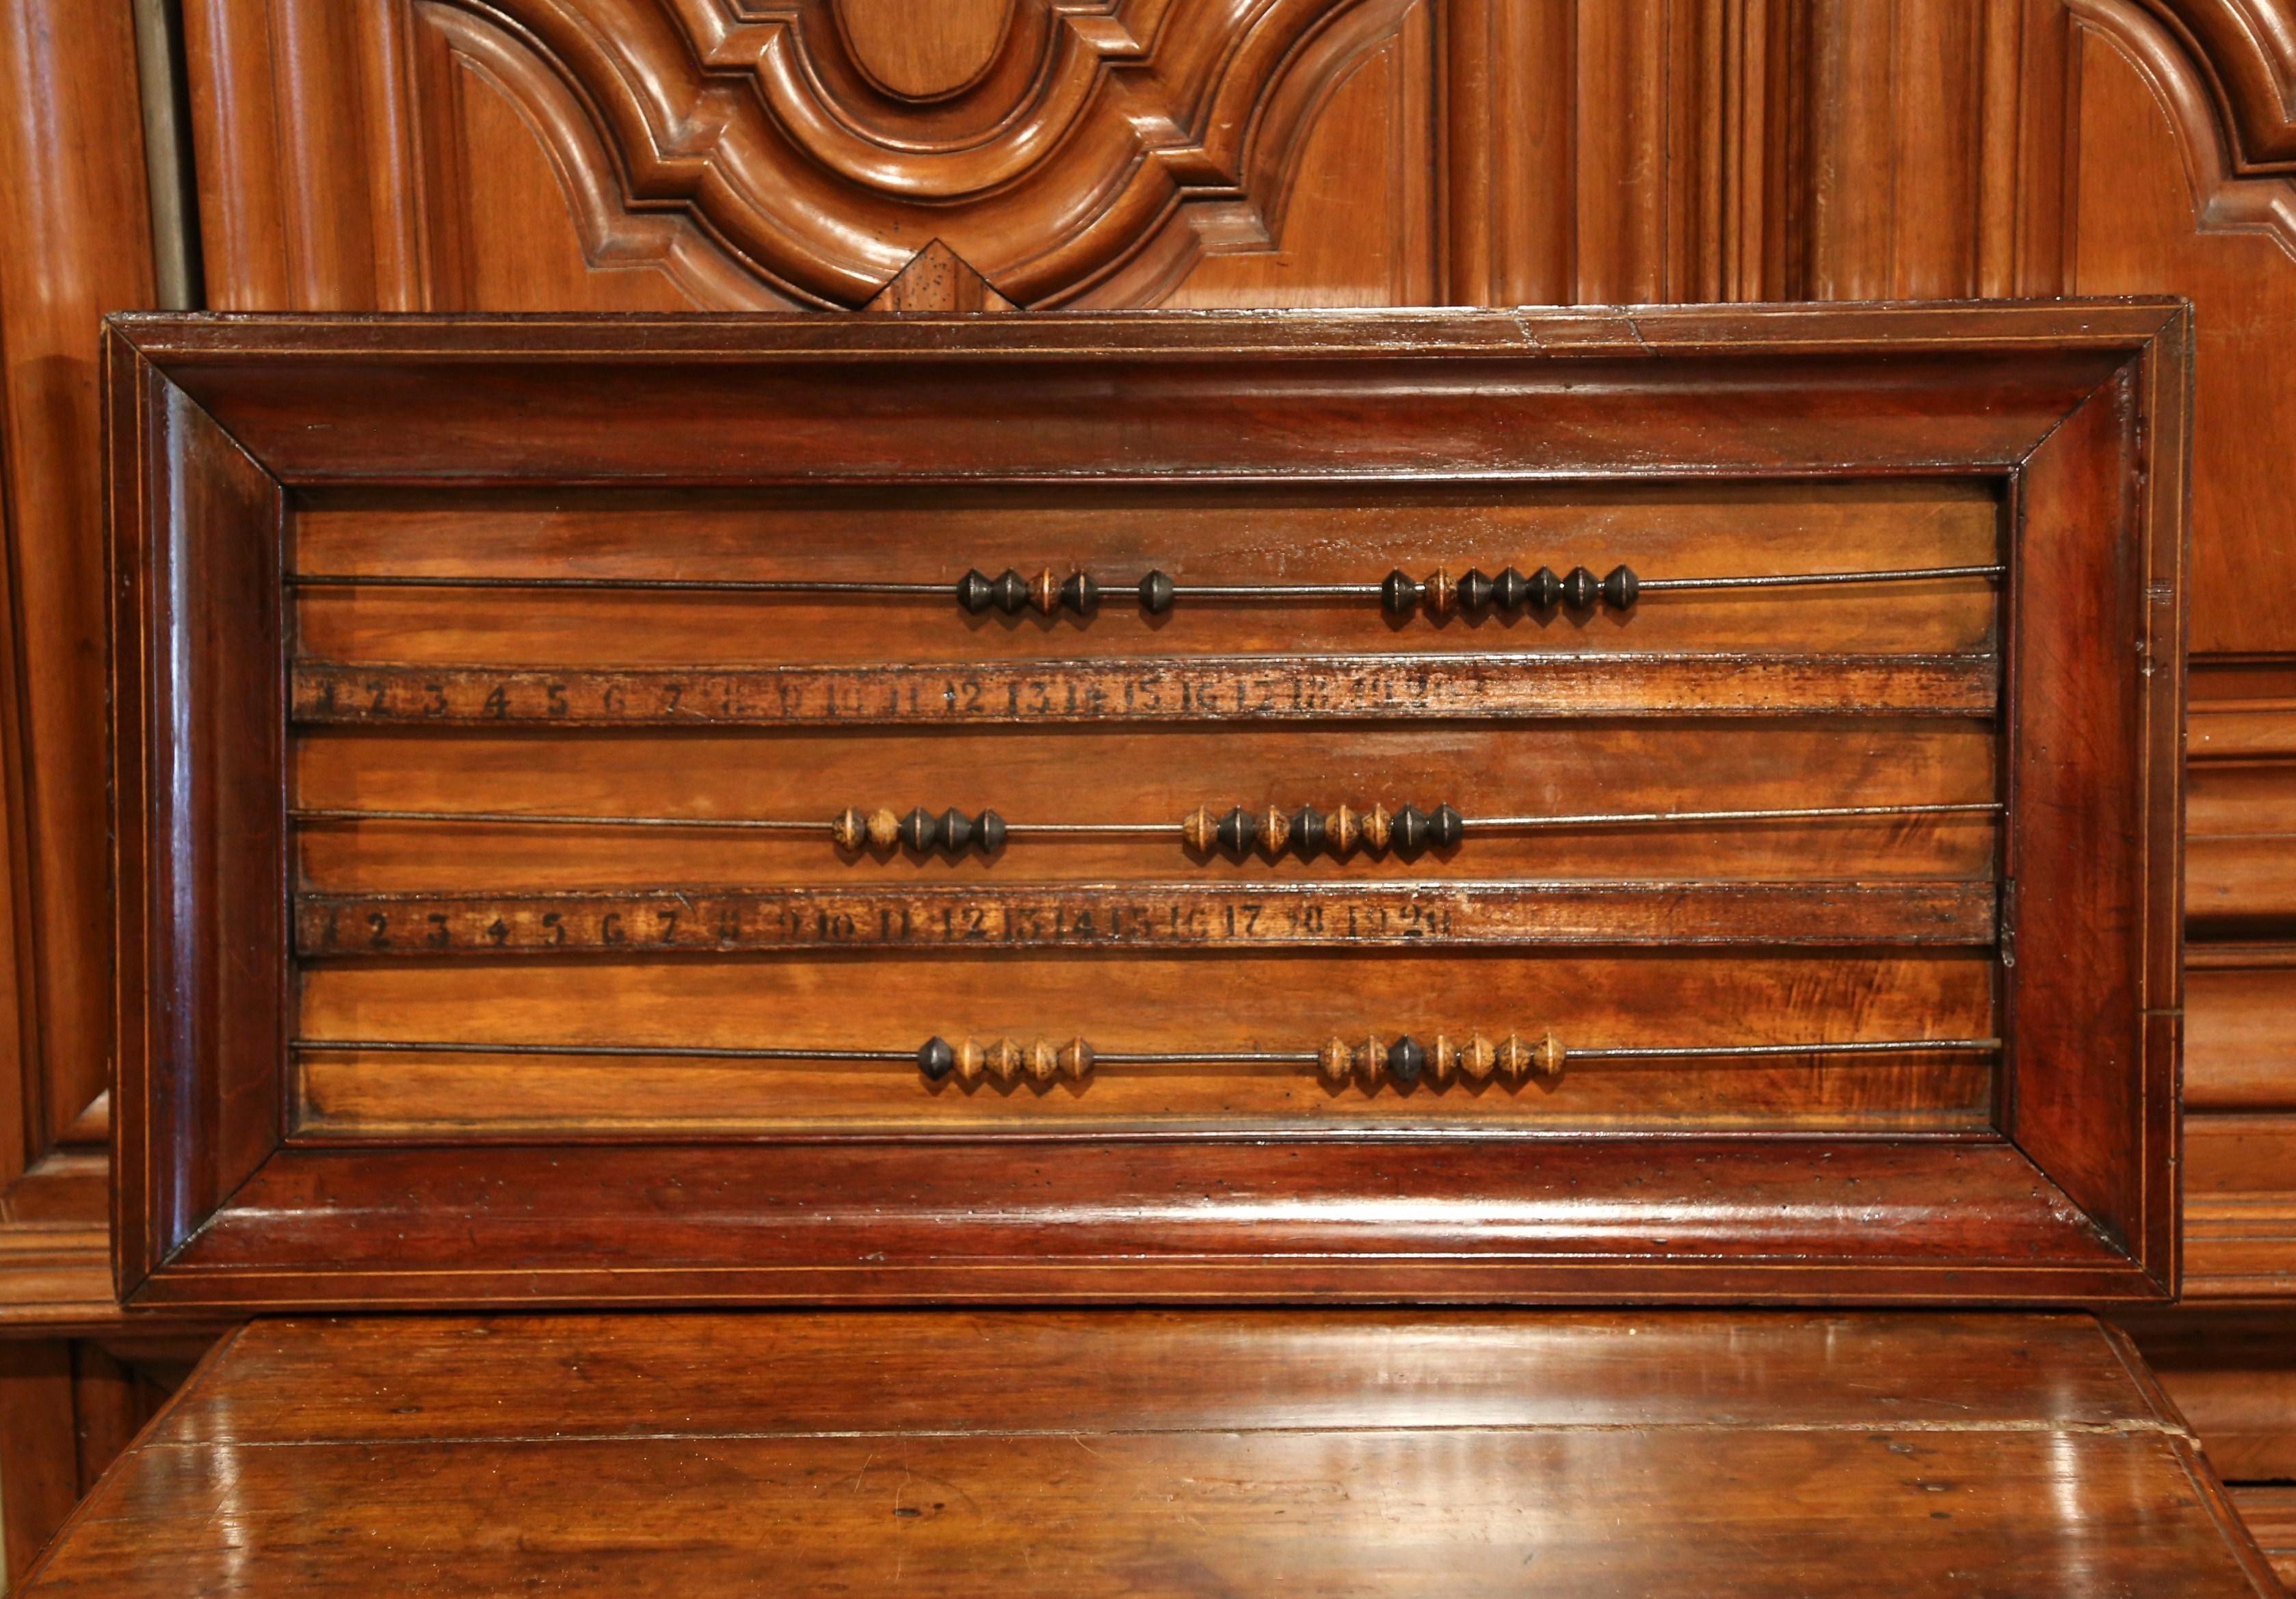 Hand-Carved 19th Century French Carved Walnut Wall Hanging Billiard Abacus or Boulier